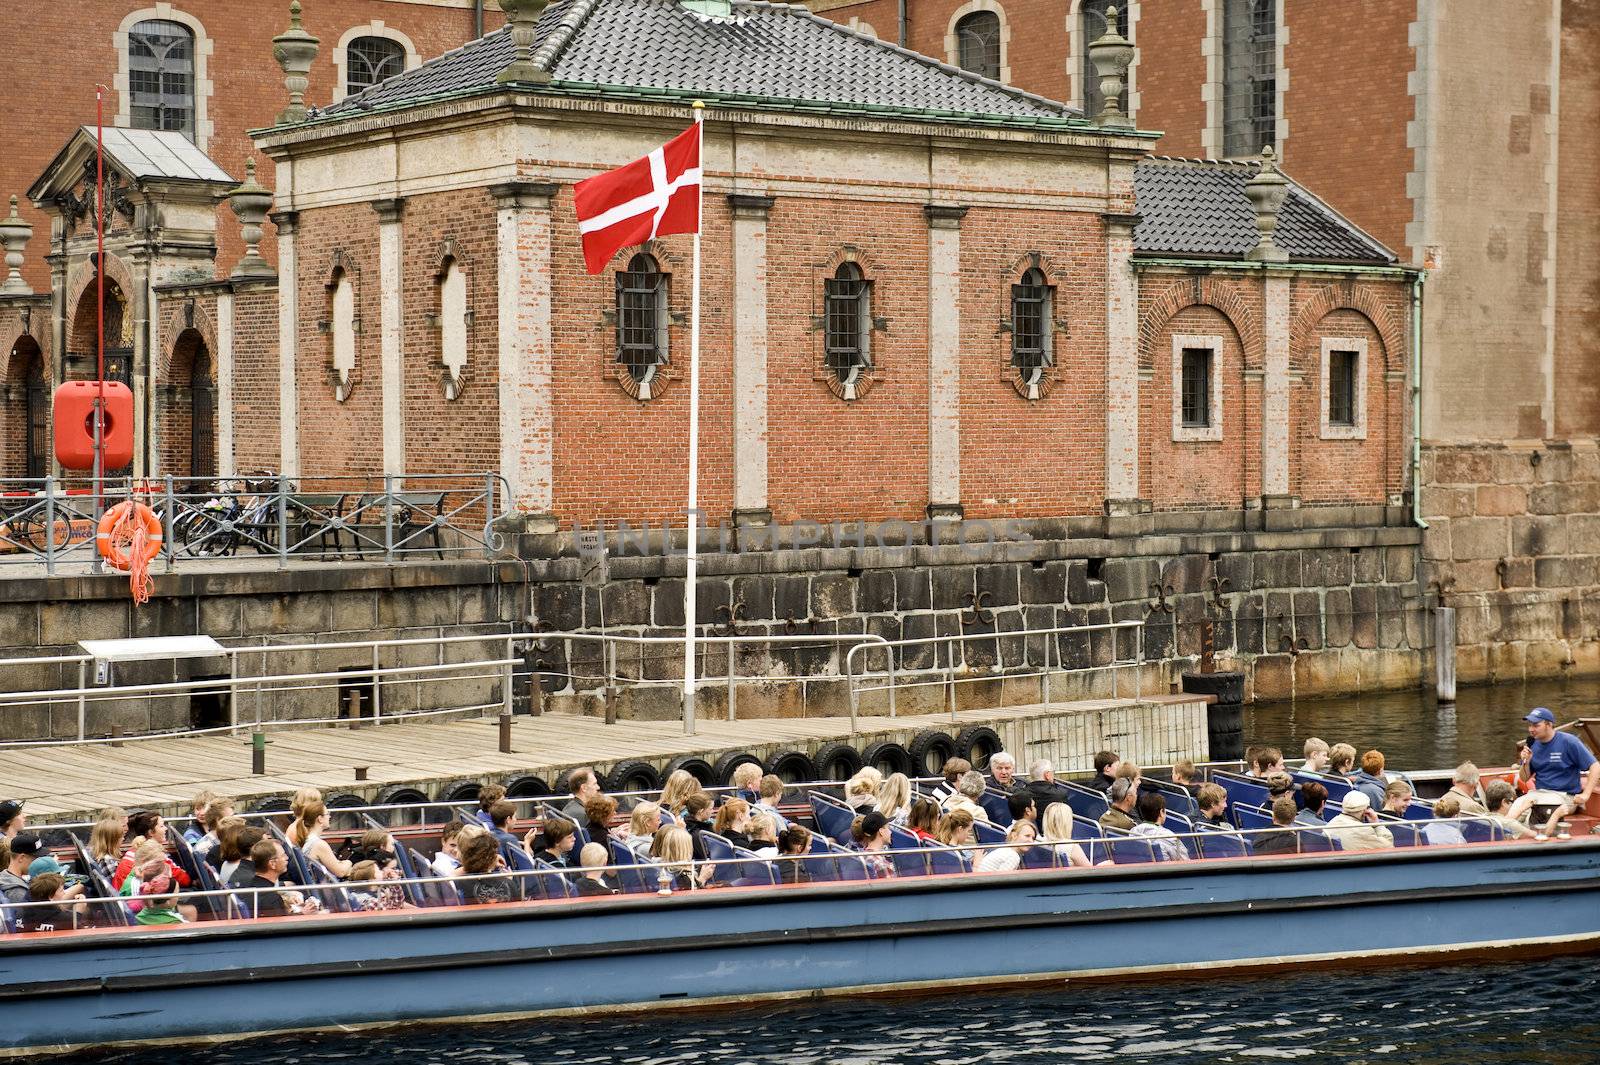 Group of tourists on an excursion boat in Copenhagen. Taken on June 2012